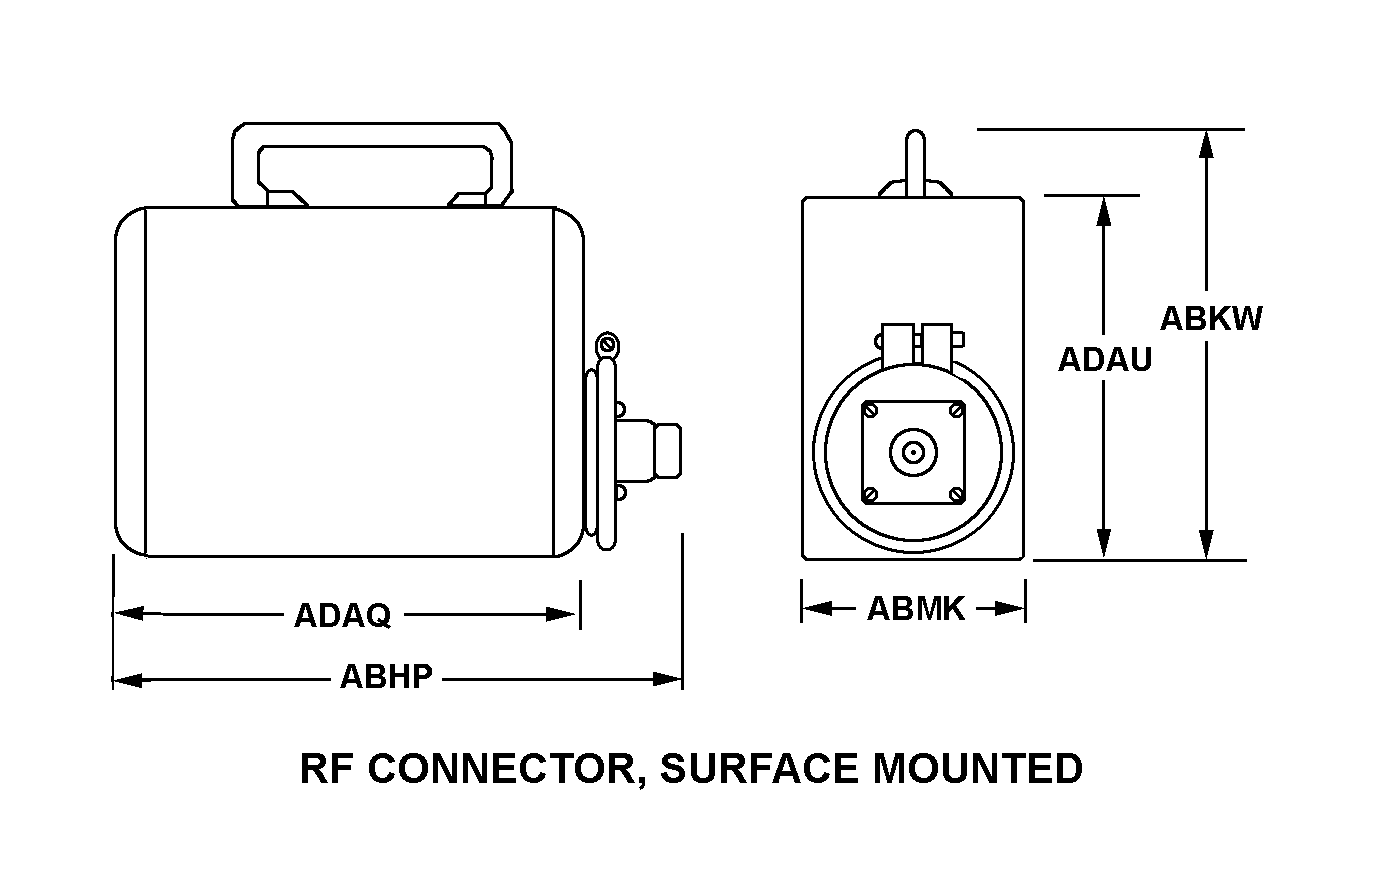 RF CONNECTOR, SURFACE MOUNTED style nsn 5985-01-155-1360